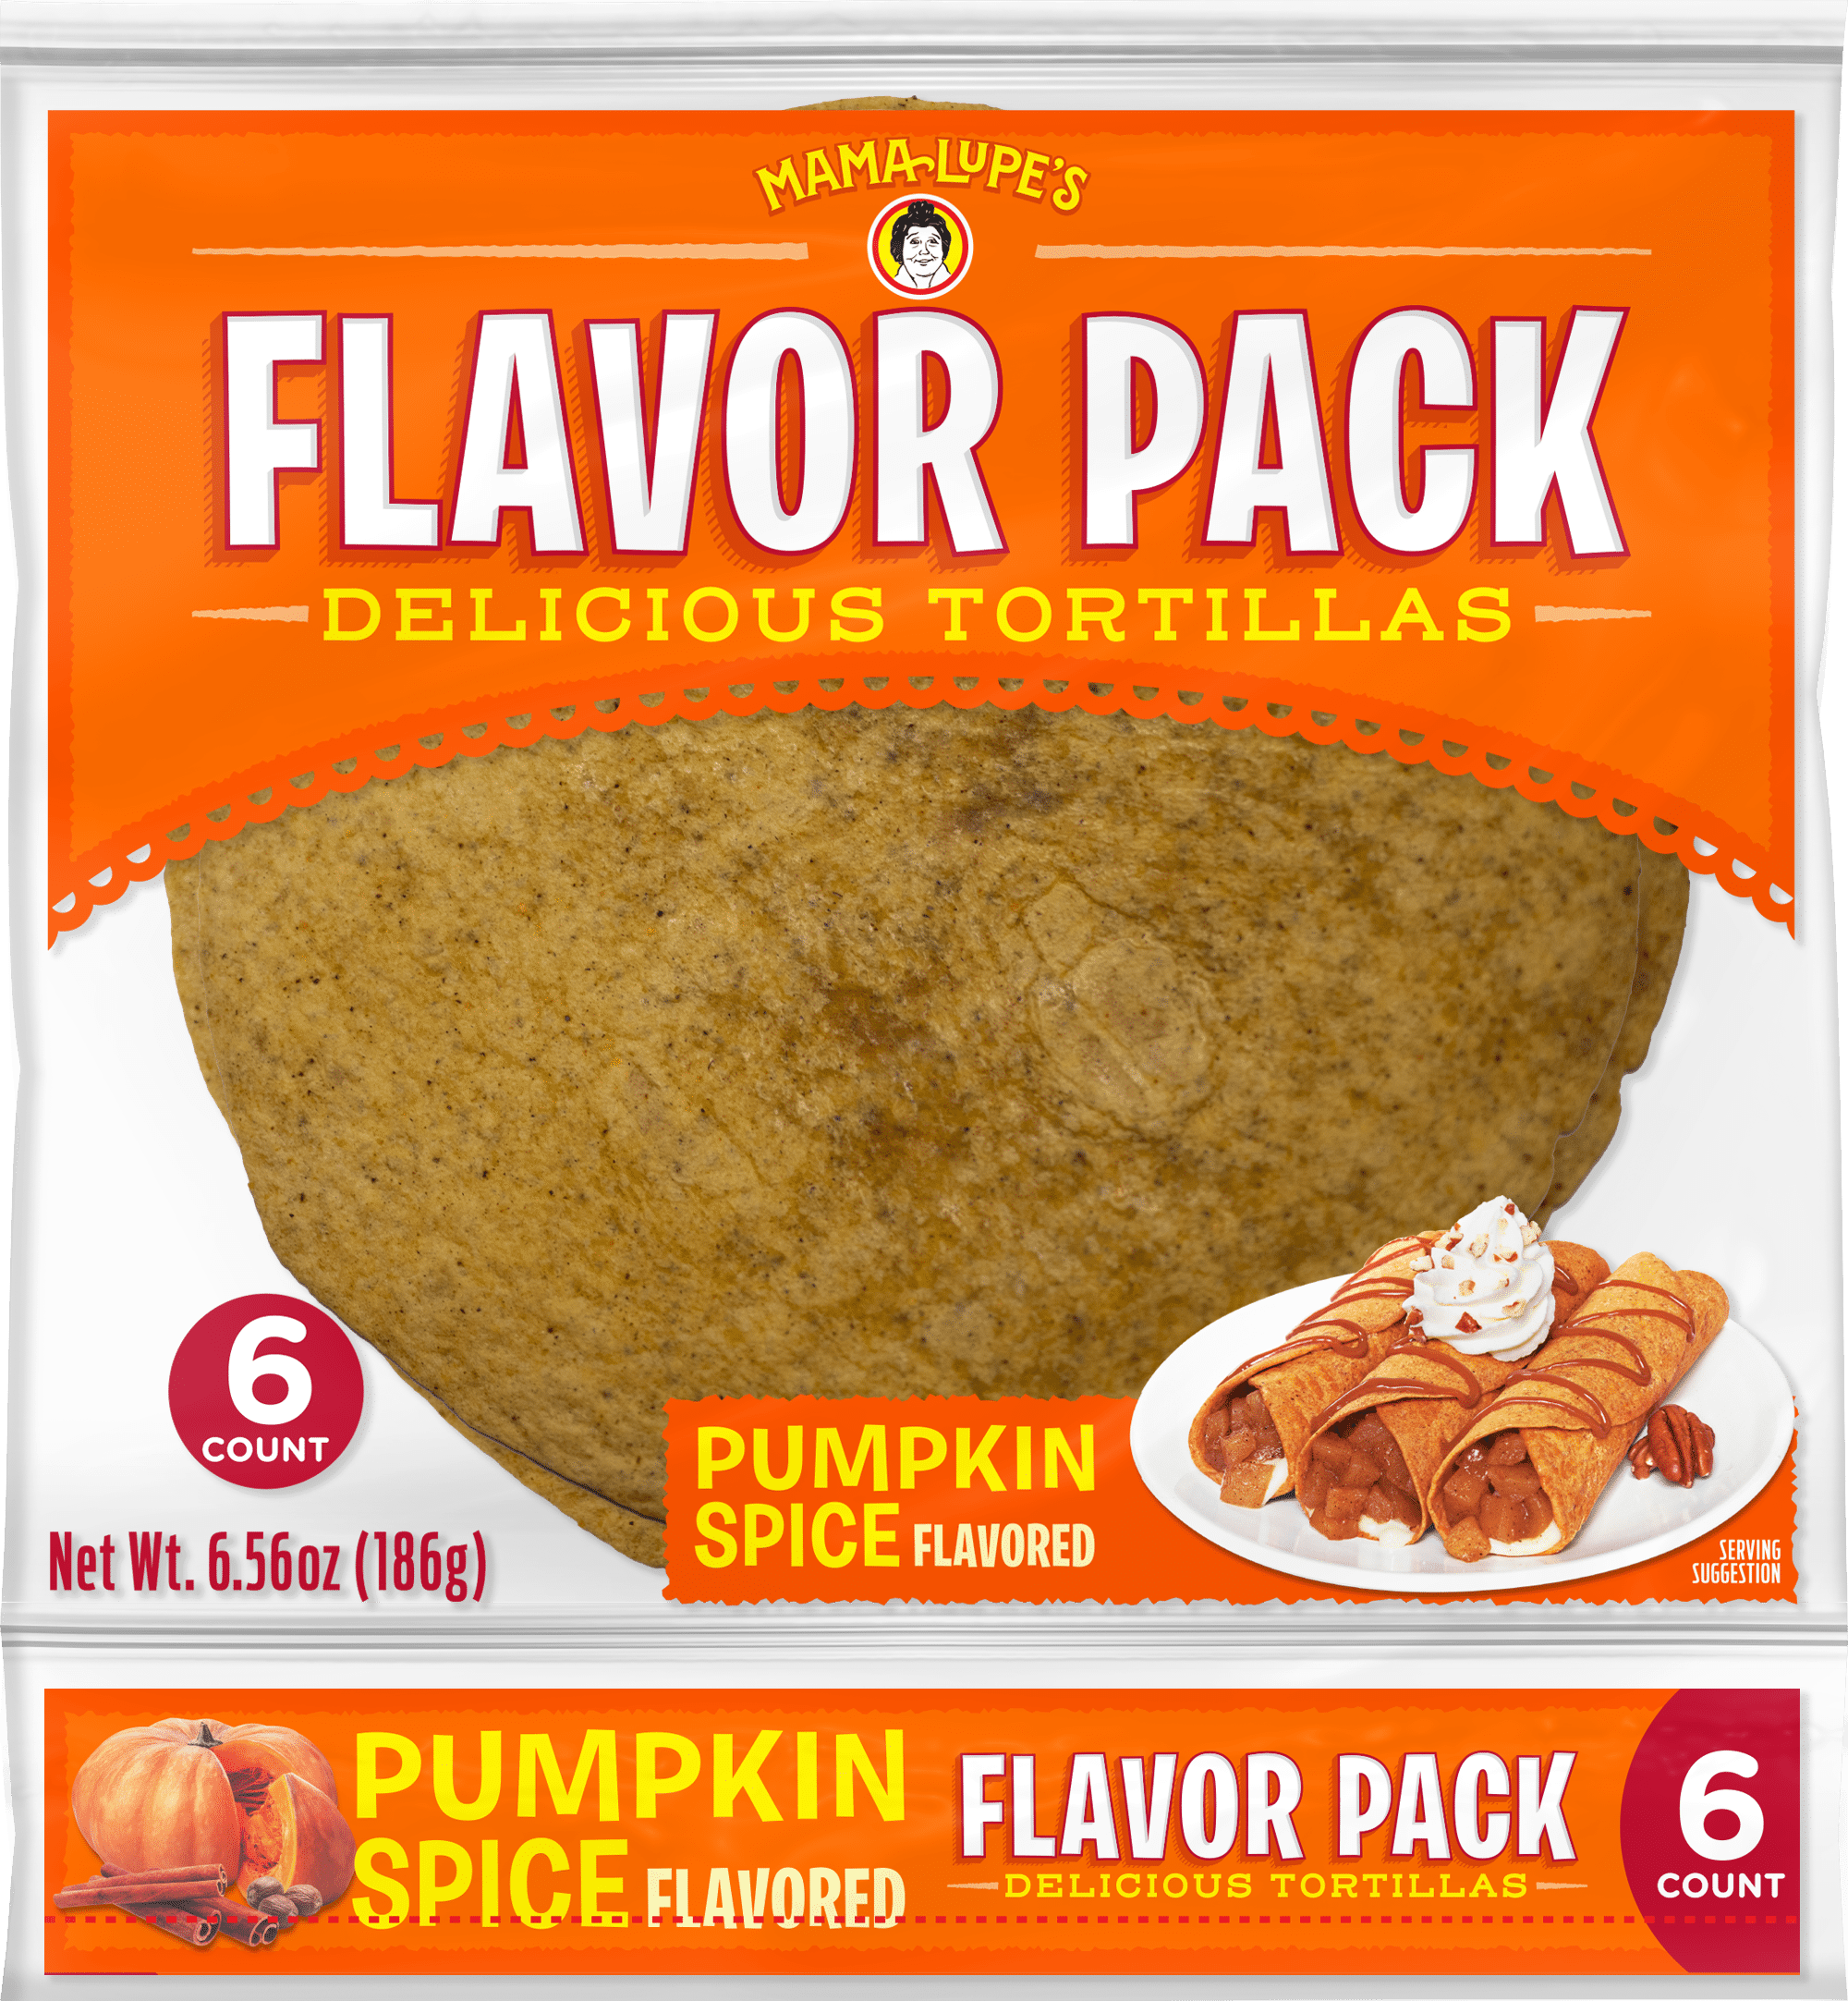 Flavor pack Pumpkin Spice Flavored Tortilla from Mama Lupe's bring a taste of fall into your day and are great with ice cream or for other creative uses. They are also great for snacking anytime.